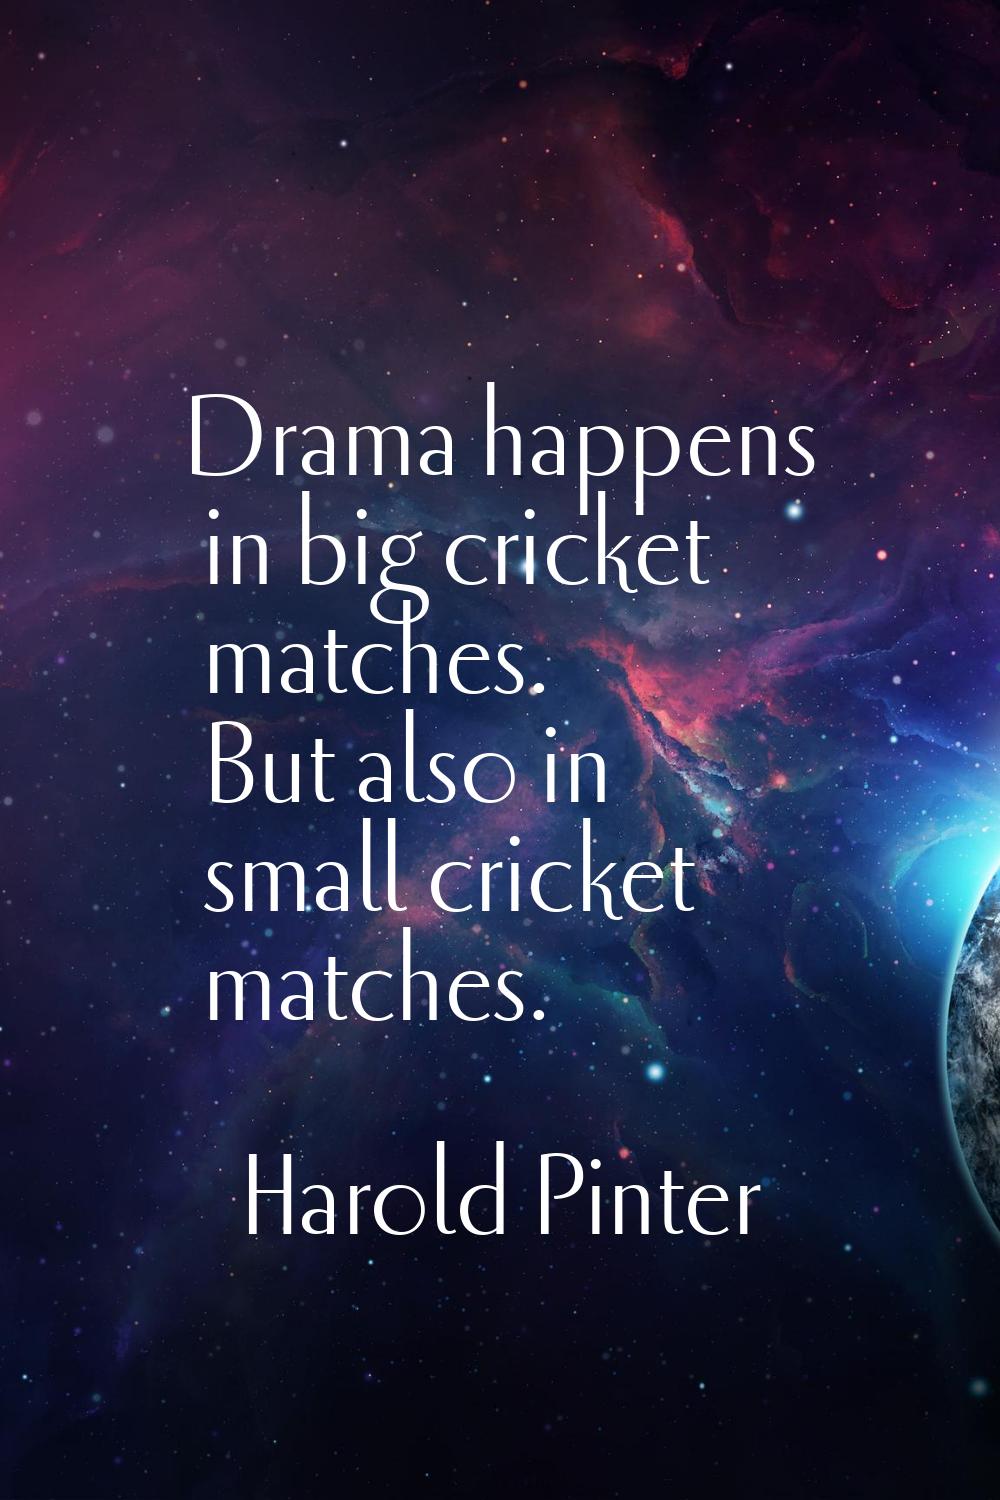 Drama happens in big cricket matches. But also in small cricket matches.